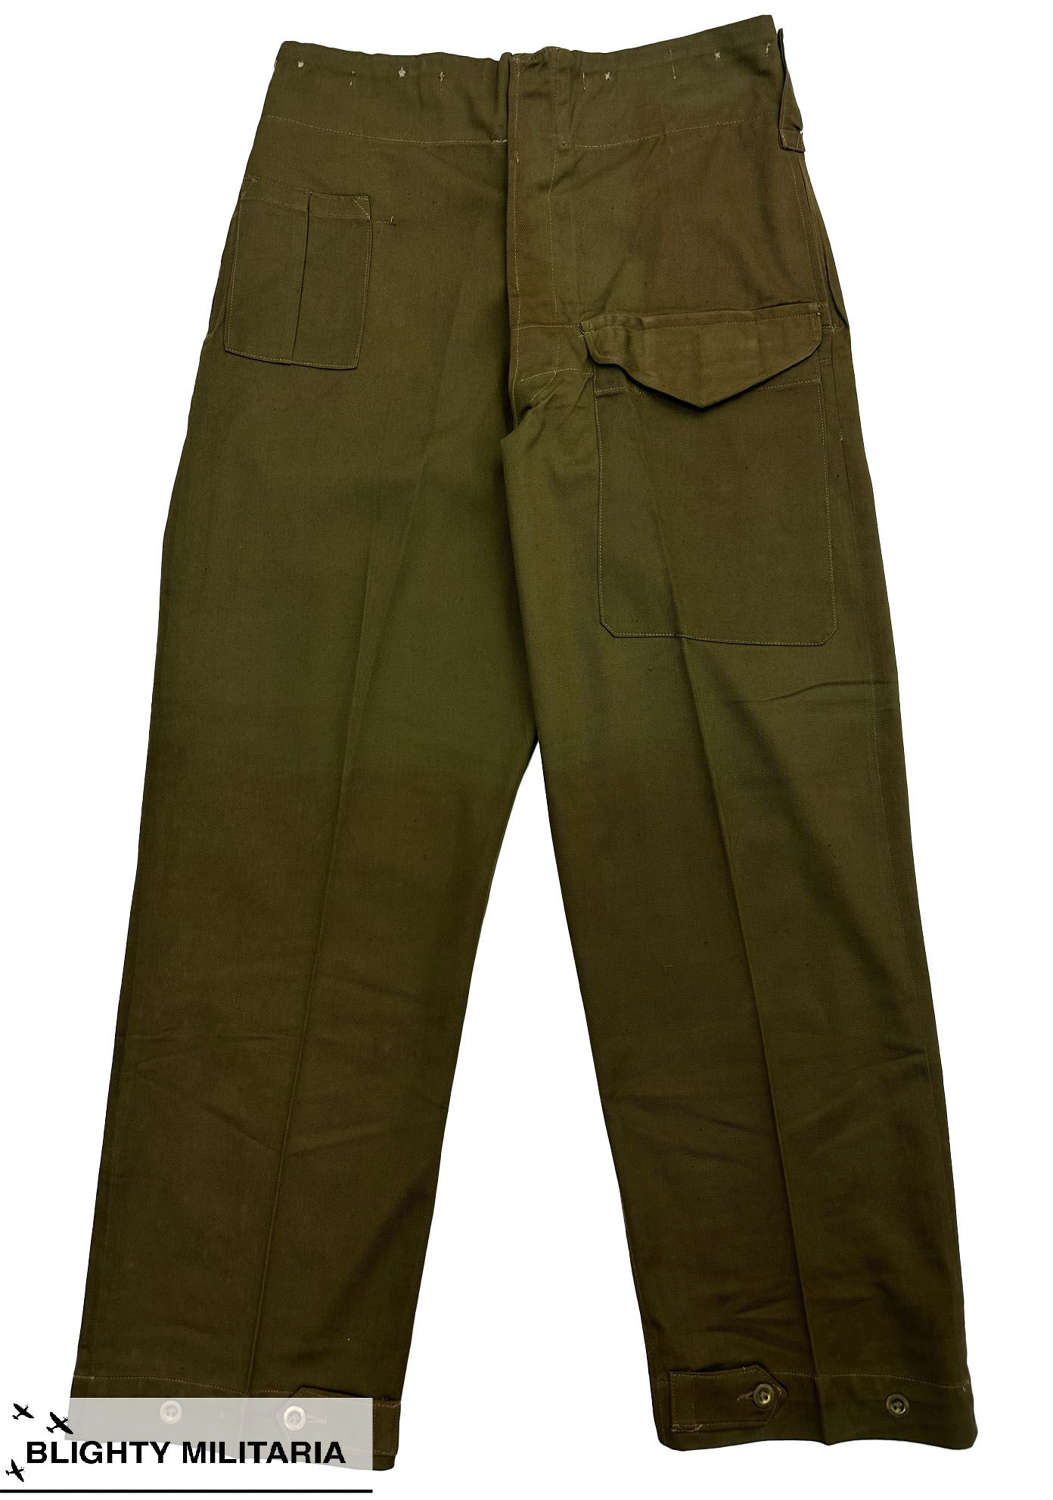 Rare 1940 Dated British Army Drill Green Fatigue Trousers - Size 4